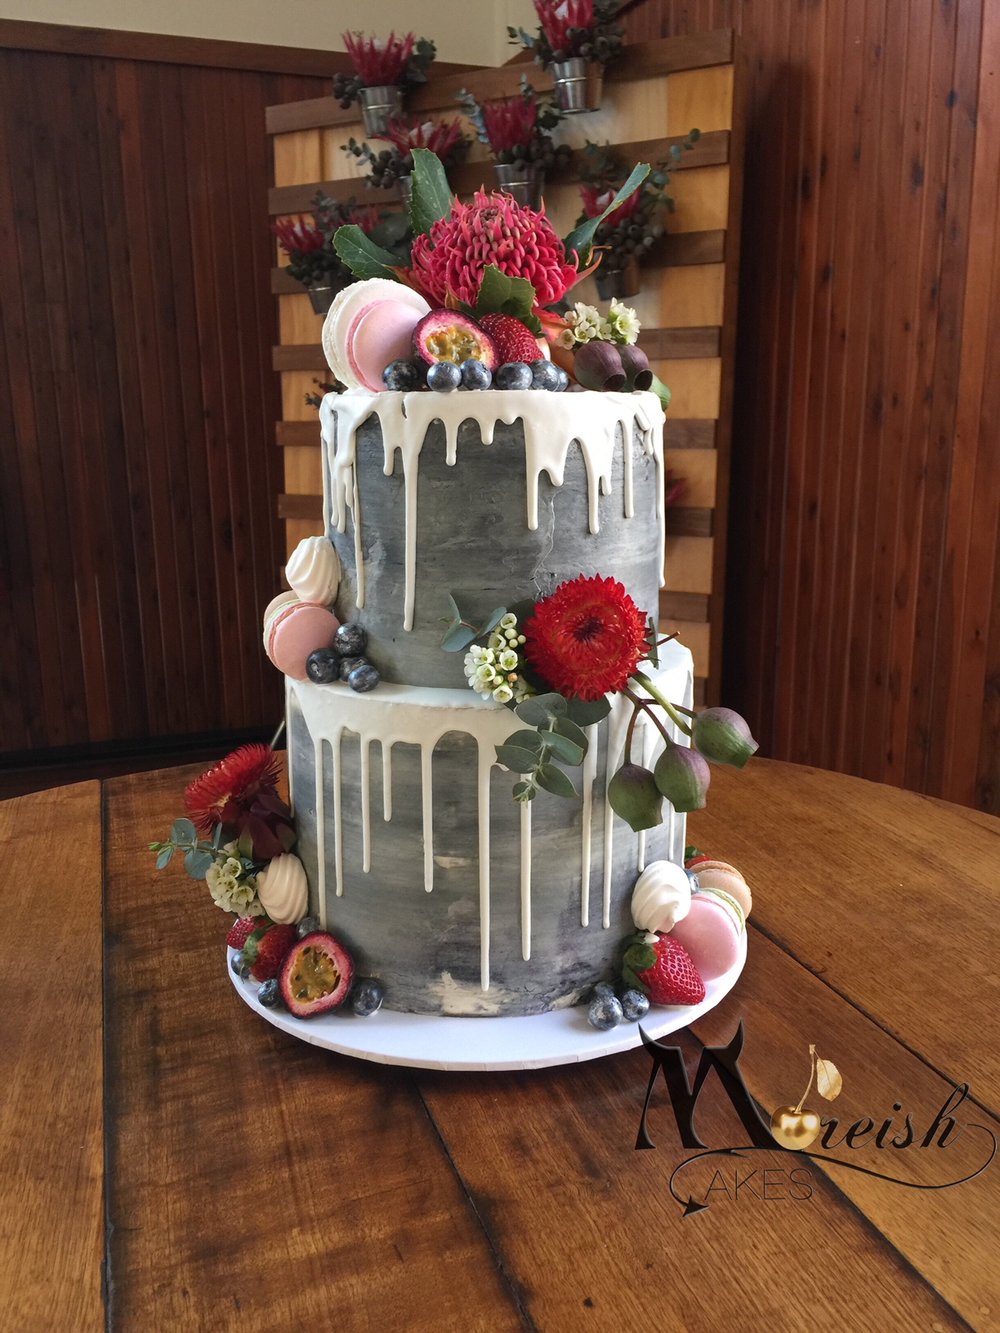 Married At First Sight - Season 5 - 2018 - Monochrome Drip Cake with Flowers and Fruit